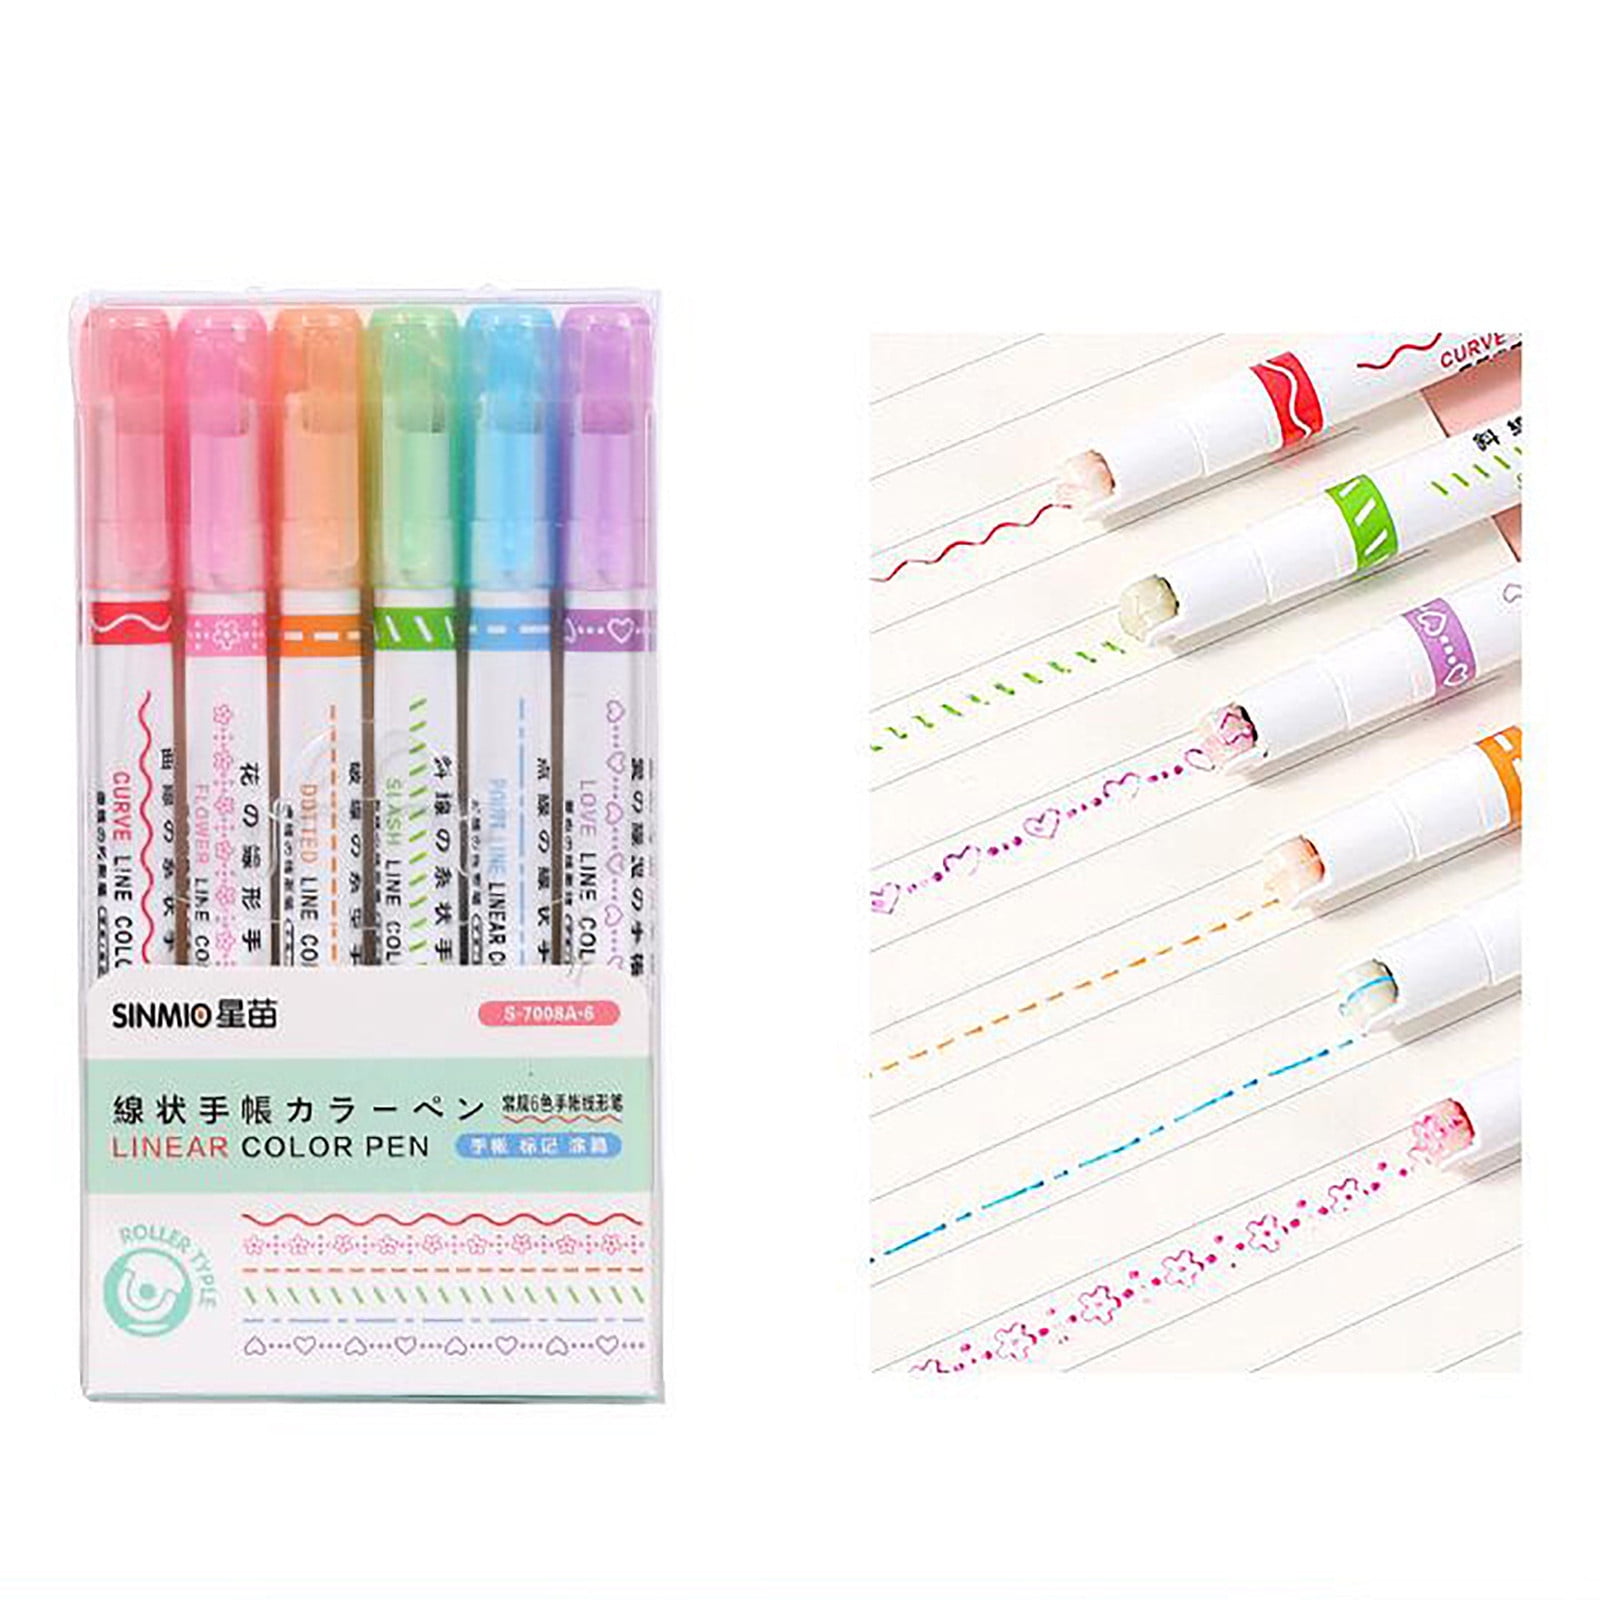 Linear Color Pens Set of 6, Patterned Roller Pens, Multicolor, Planner,  Card Making, Journaling, Mixed Media, Paper Crafting, Writing Pen 